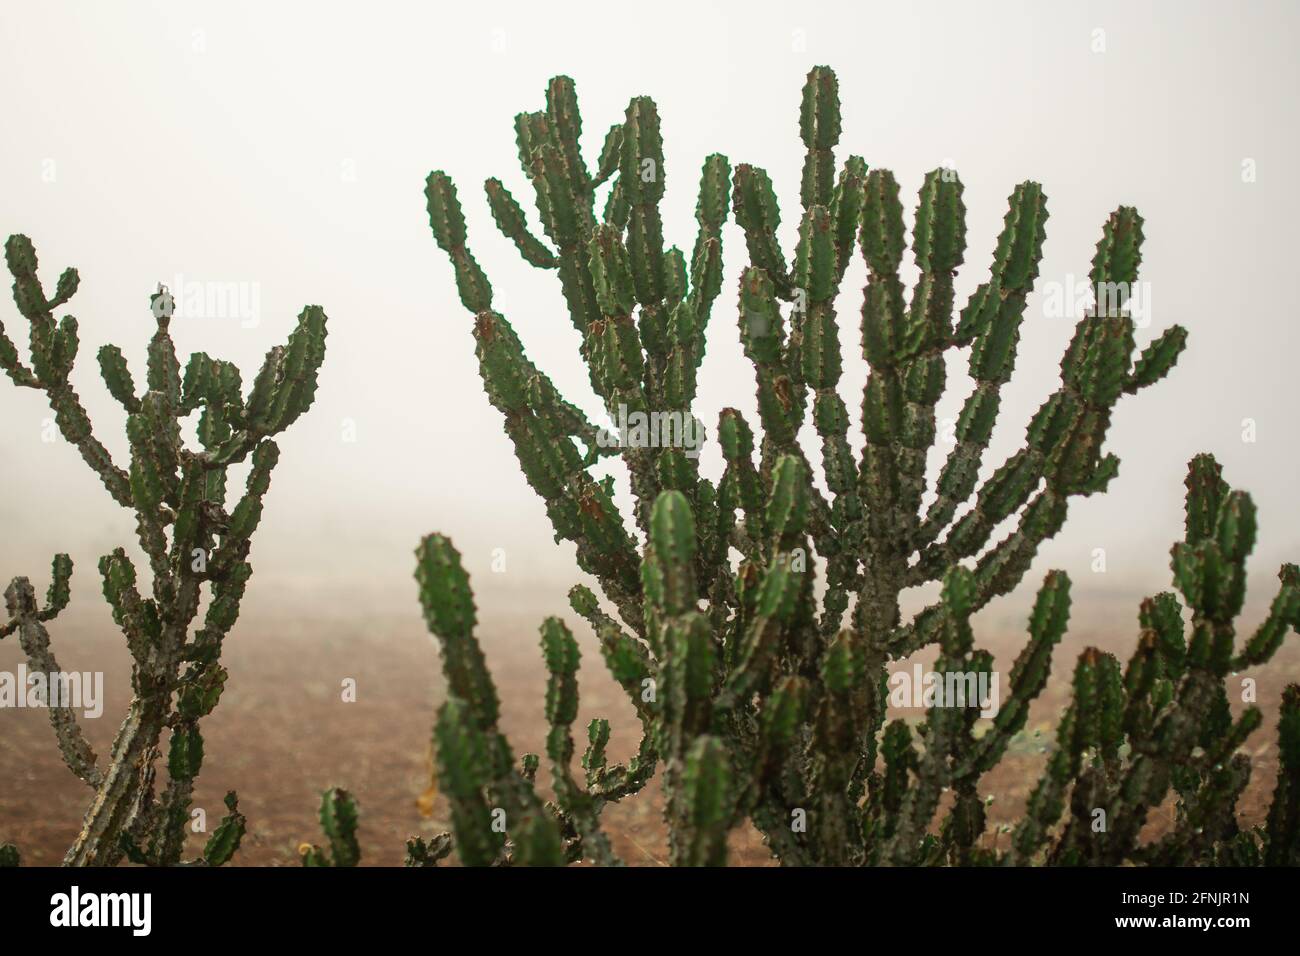 A single cactus plant standing on a farm field in the heavy early morning mist between Kalaw and Inle Lake, Shan state, Myanmar Stock Photo